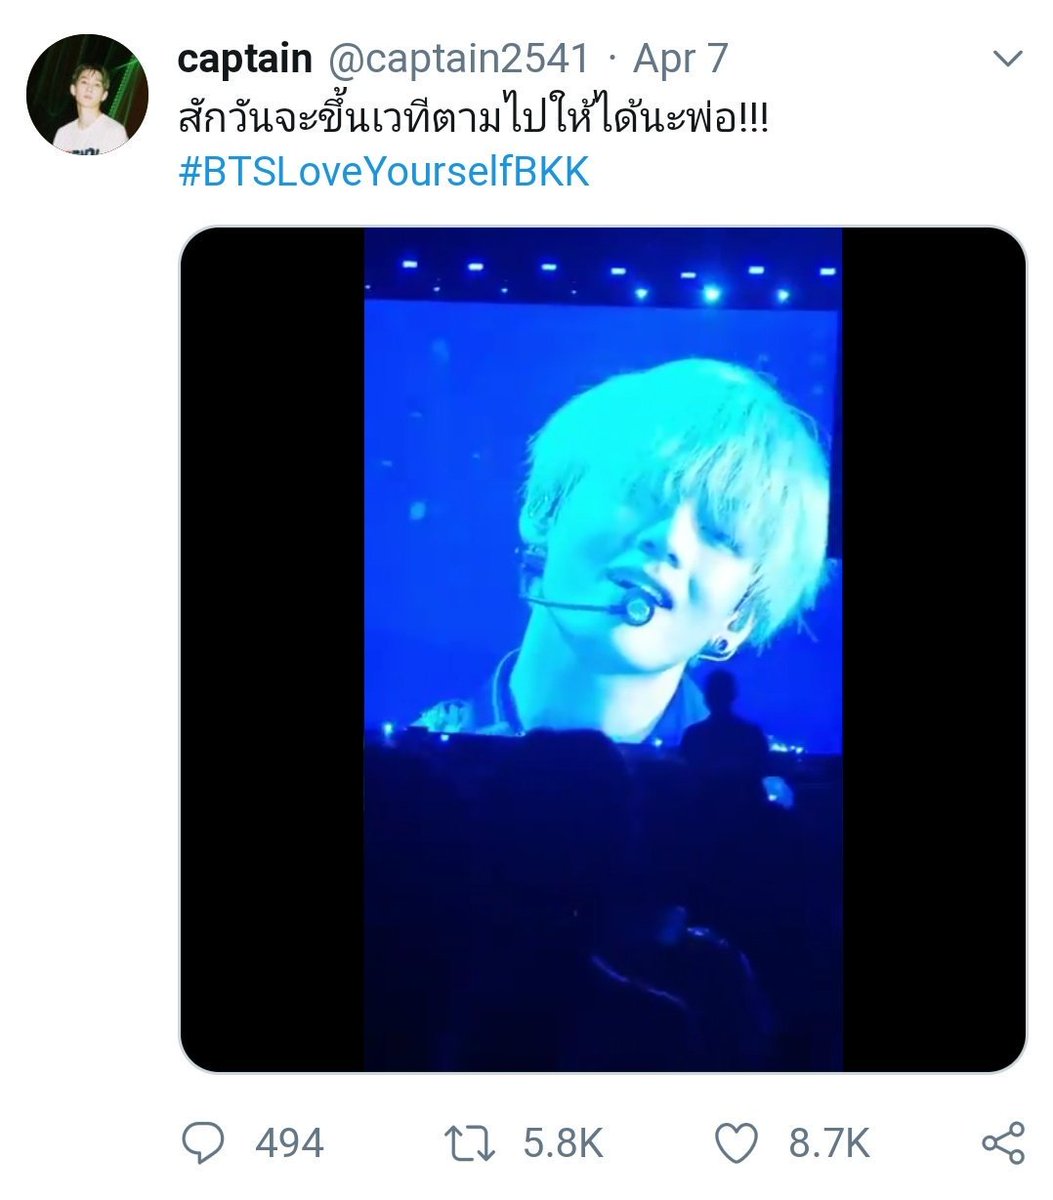 32. Popular Thai actor Chonlathorn "Captain" Kongyingyong is a HUGE fan of Taehyung the actor tweeted abt Taehyung's phenomenonal performance of Singularity at the concert & wrote that he wants to follow in tae's footsteps Tae has so many admirers everywhere  #BTSV  @BTS_twt  #뷔  